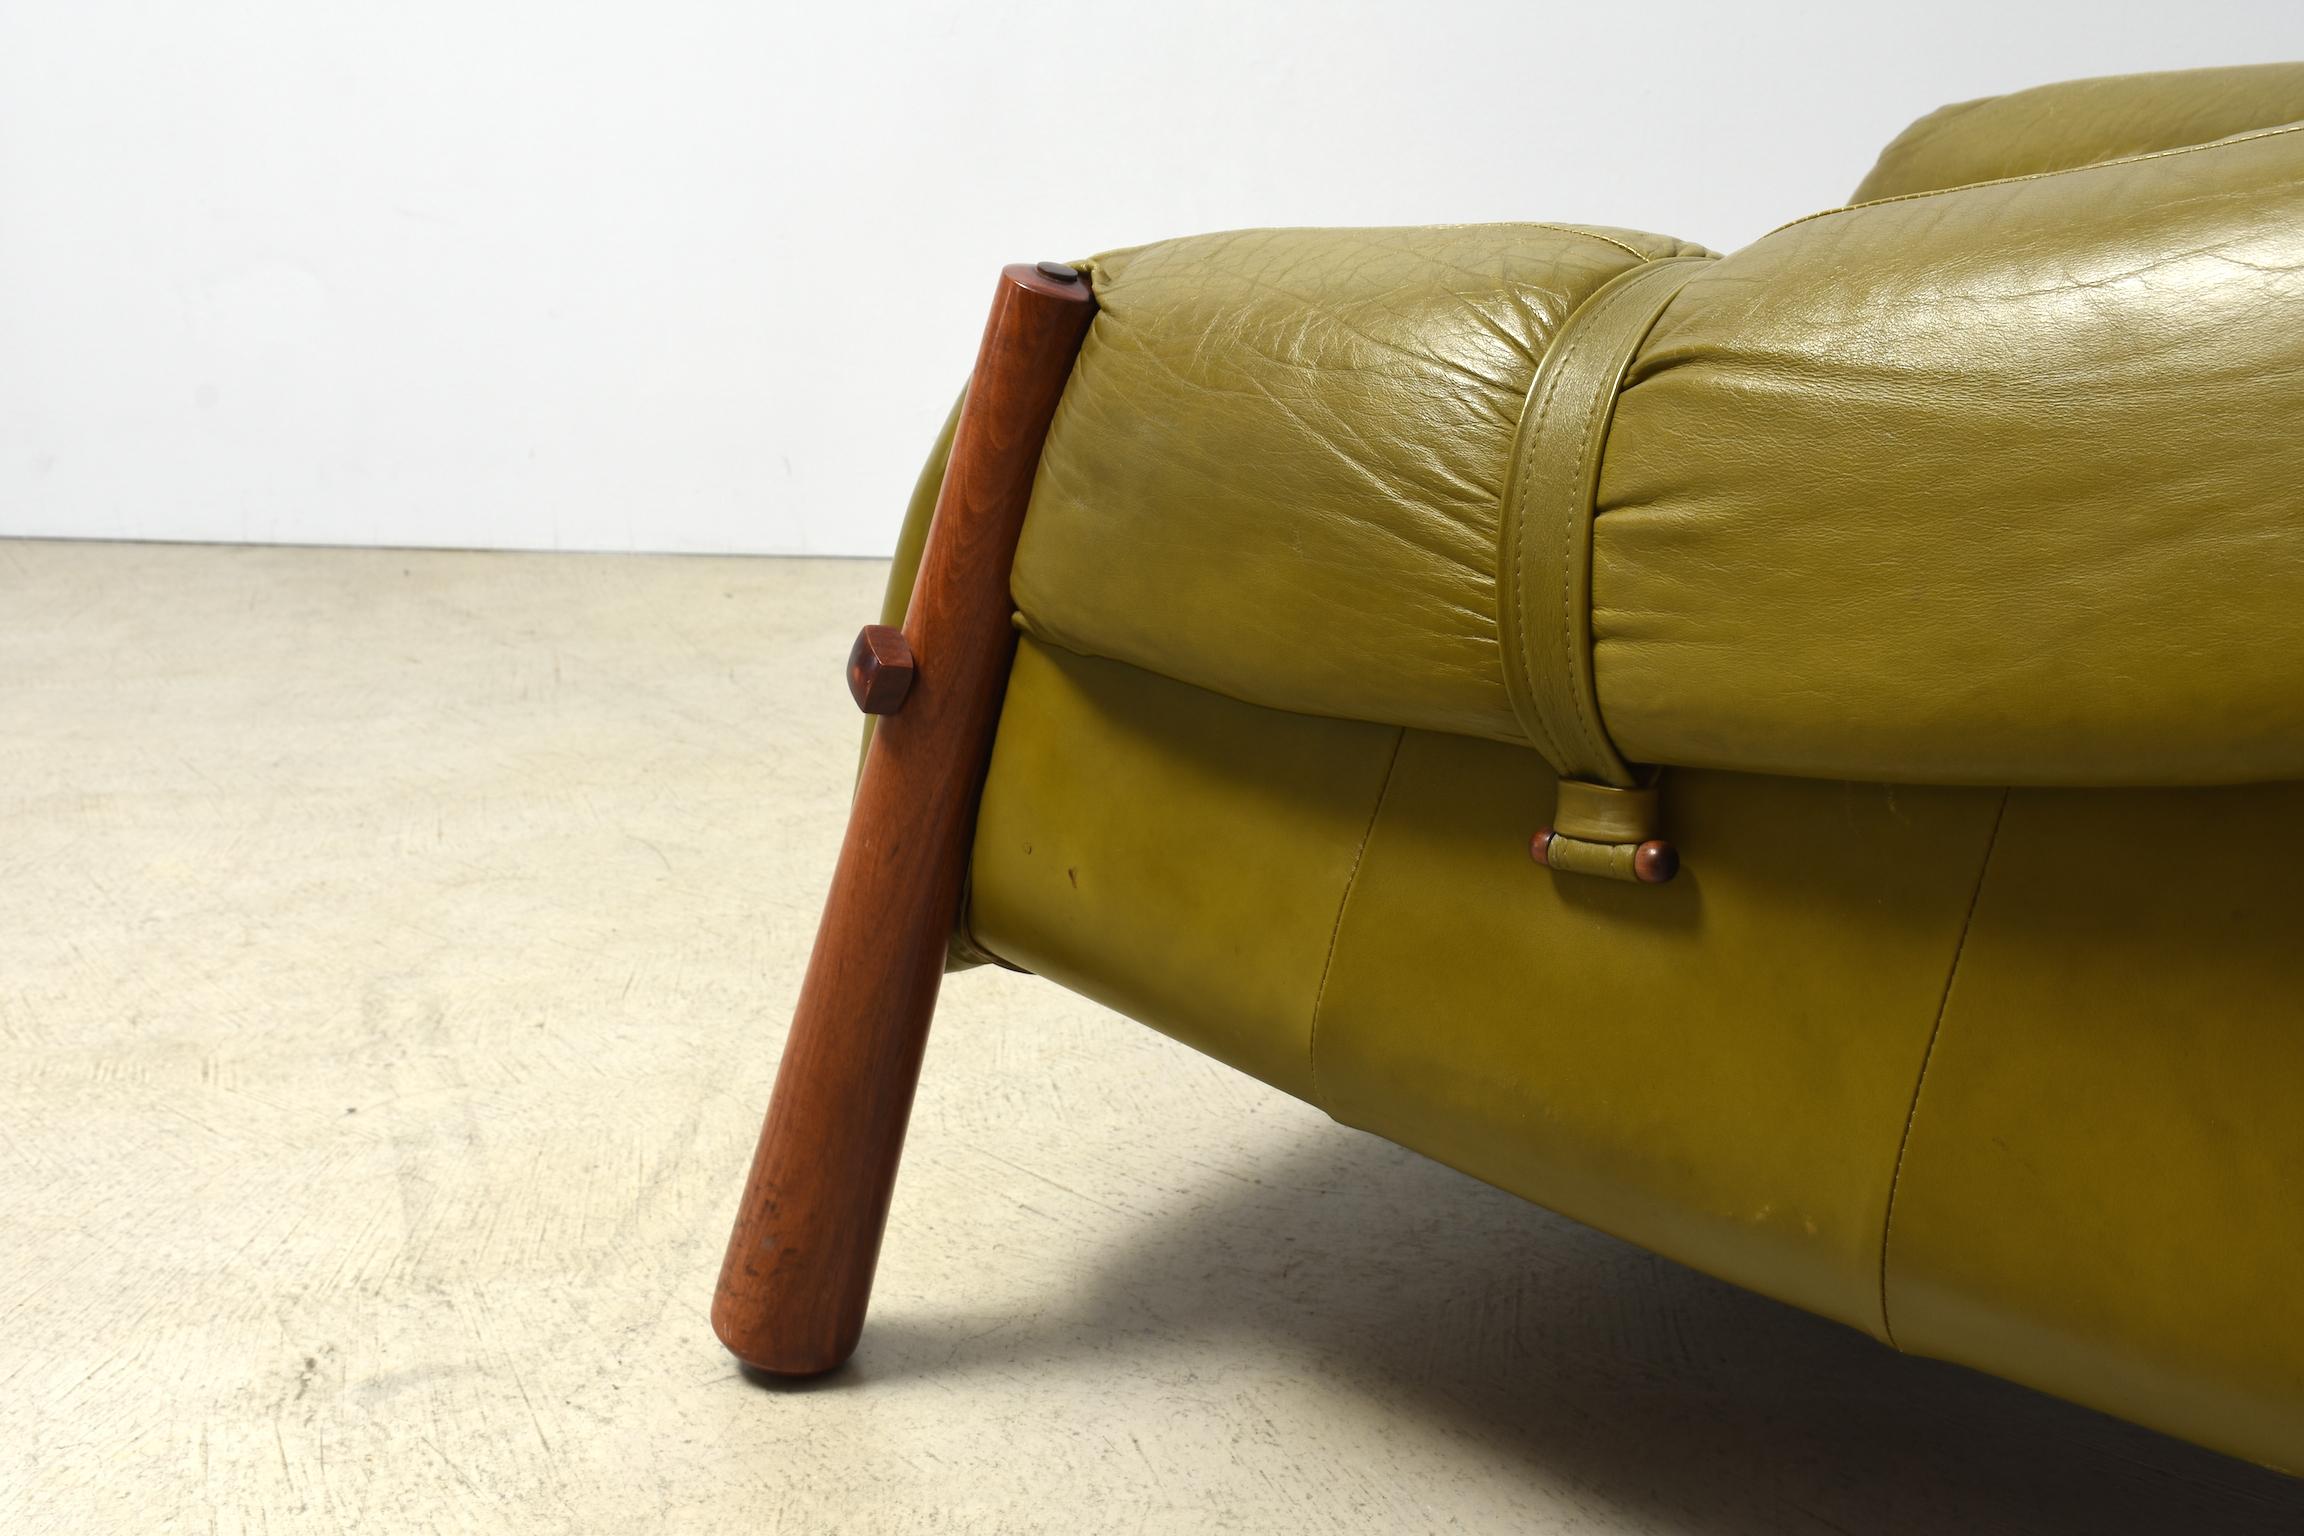 Mid-20th Century Percival Lafer Brazilian Lounge Chair Late 1950s Jacaranda Leather Olivegreen For Sale